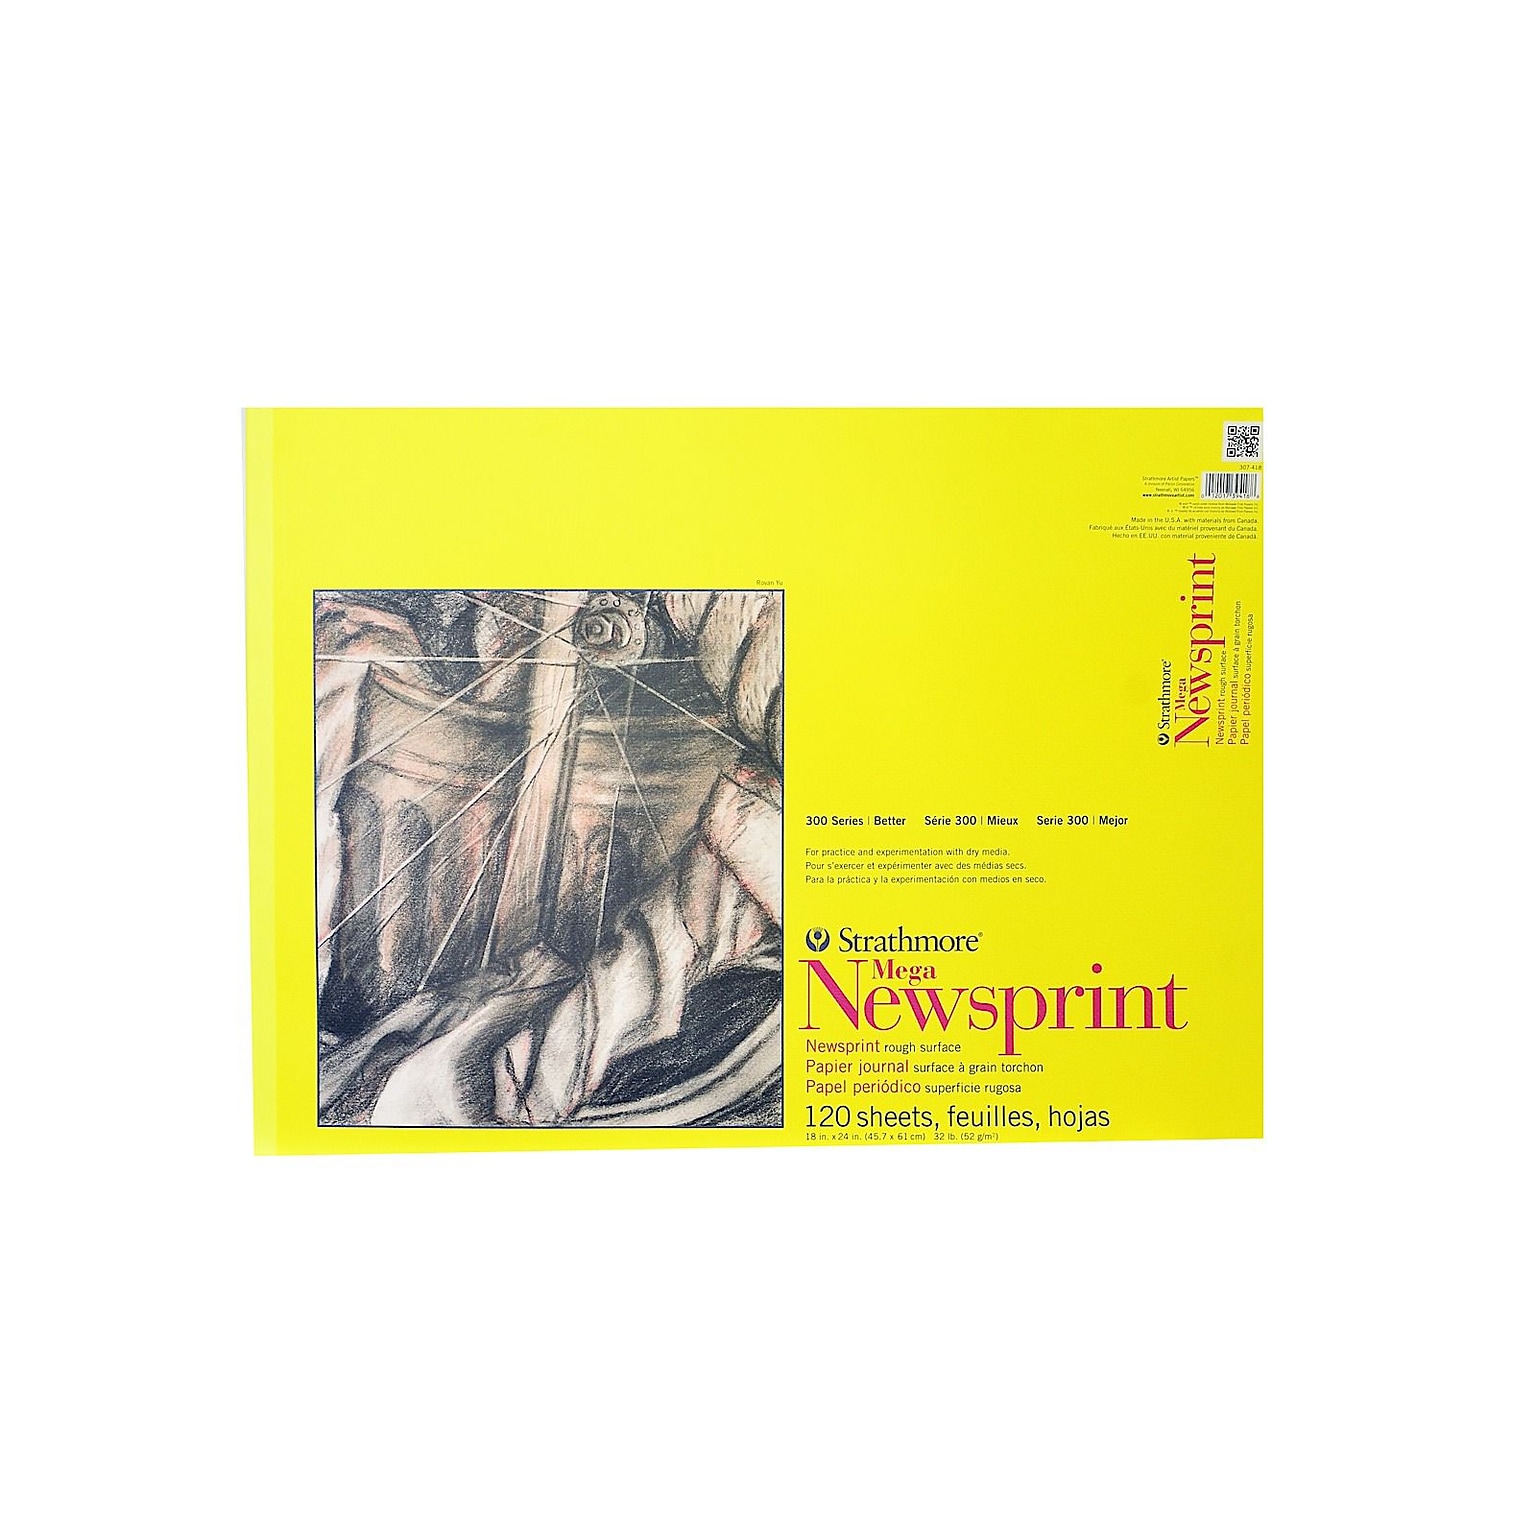 Strathmore 300 Series Newsprint Paper Pads Rough 120 Sheets 18 In. X 24 In. [Pack Of 2] (2PK-307-418-1)